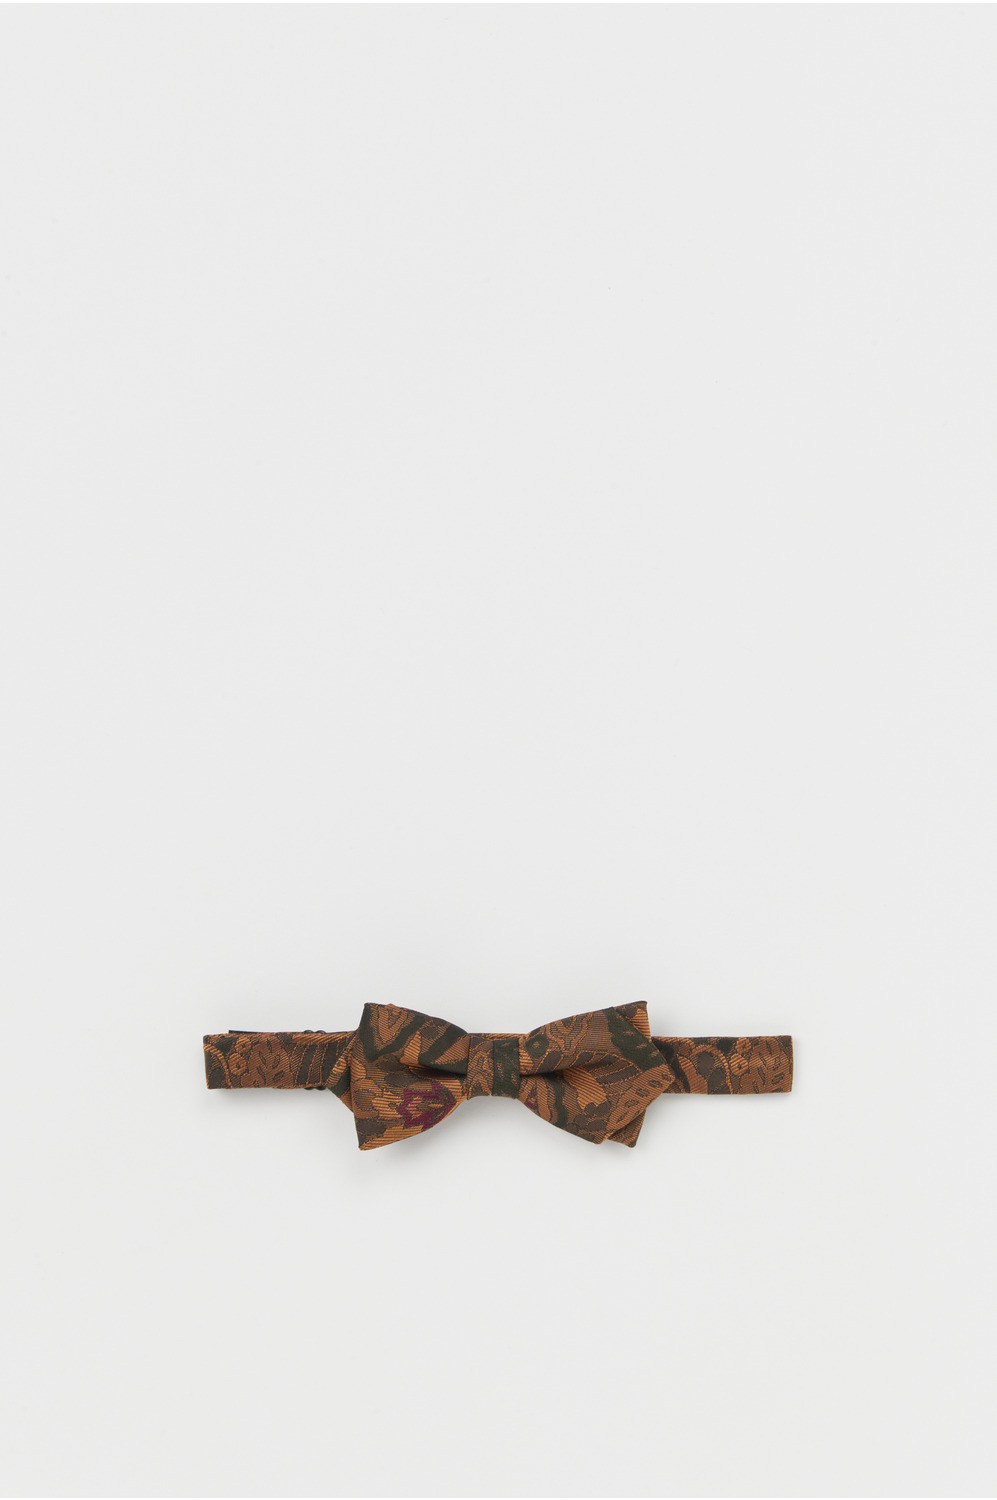 bowtie 詳細画像 akebia(yellow earth color) 1